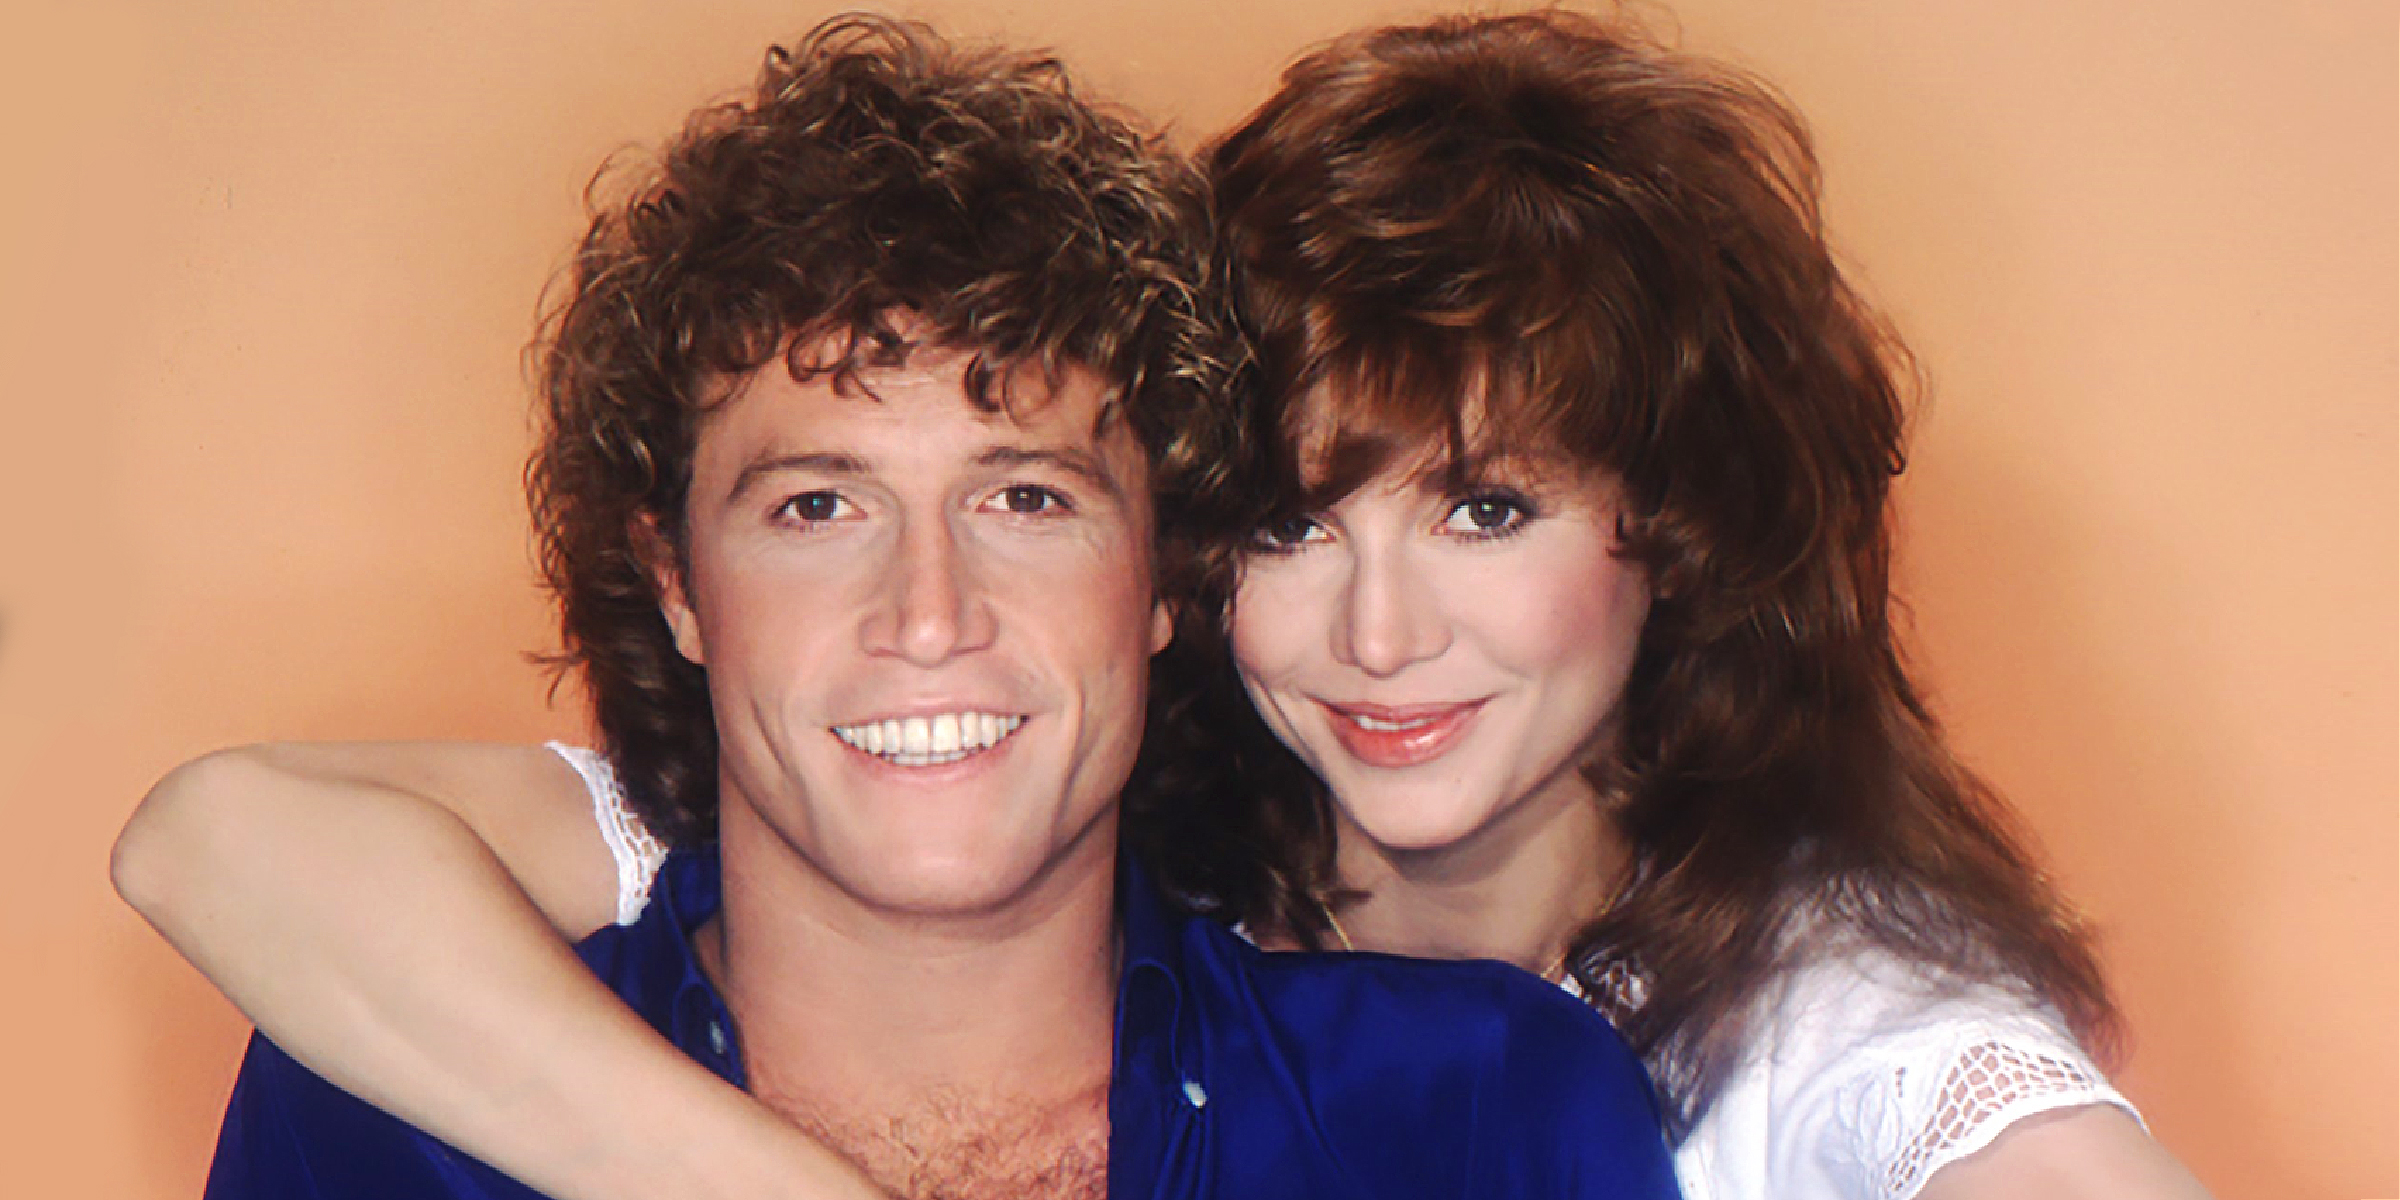 Andy Gibb and Victoria Principal, 1981 | Source: Getty Images